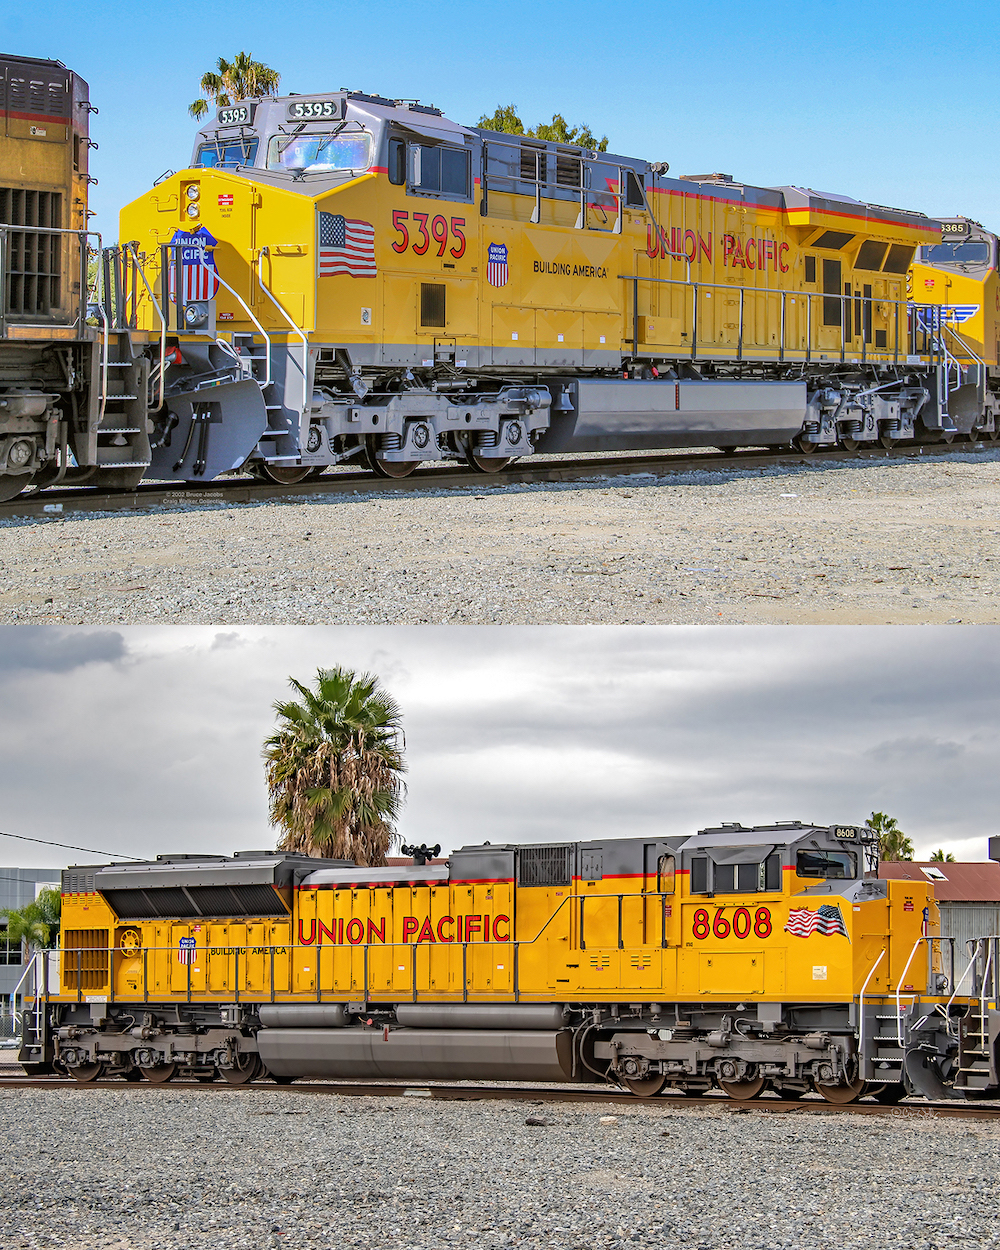 A pair of photos showing the sides of yellow diesel locomotives